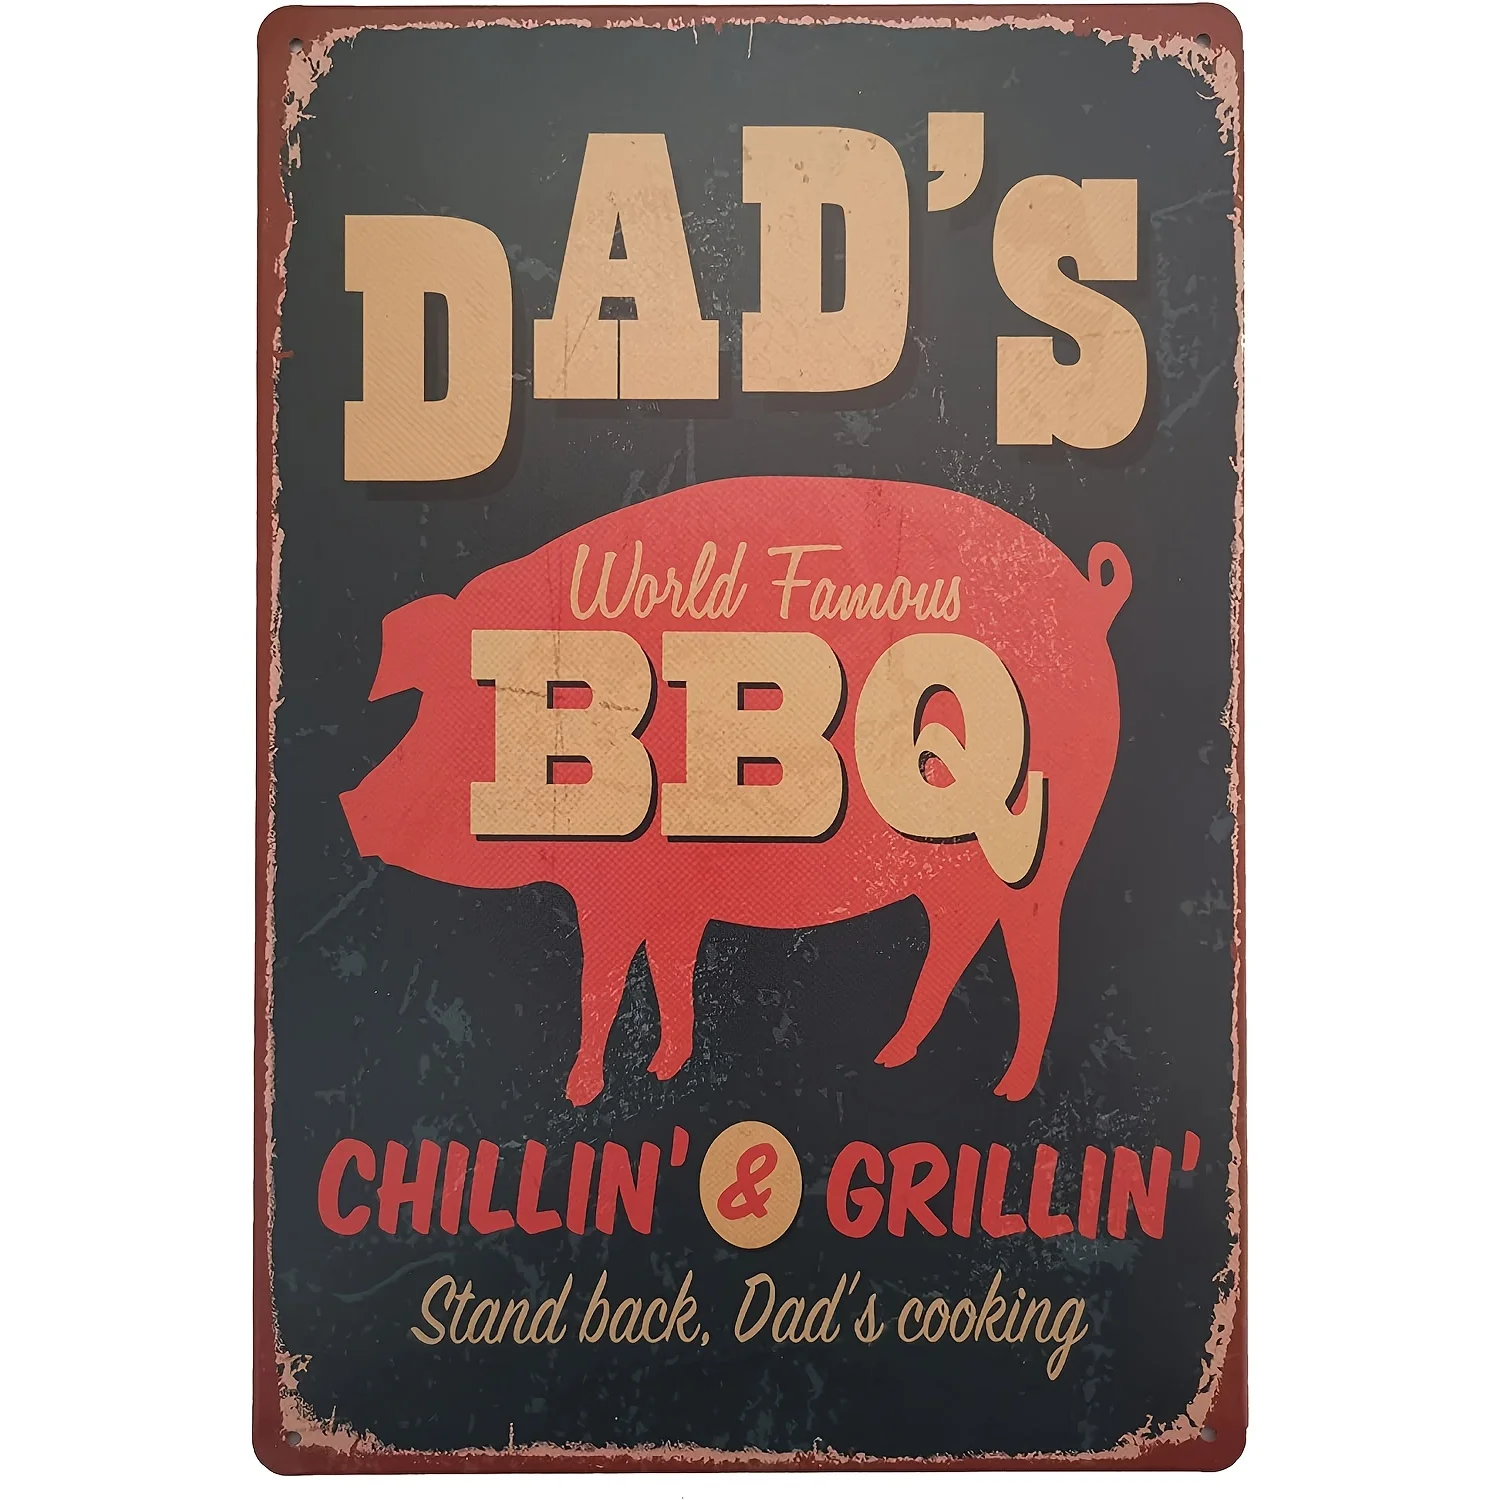 

New Warning BBQ Zone Vintage Tin Signs OutdoorRetro Metal Wall Poster Decorative Tin Sign 12x8 Inches